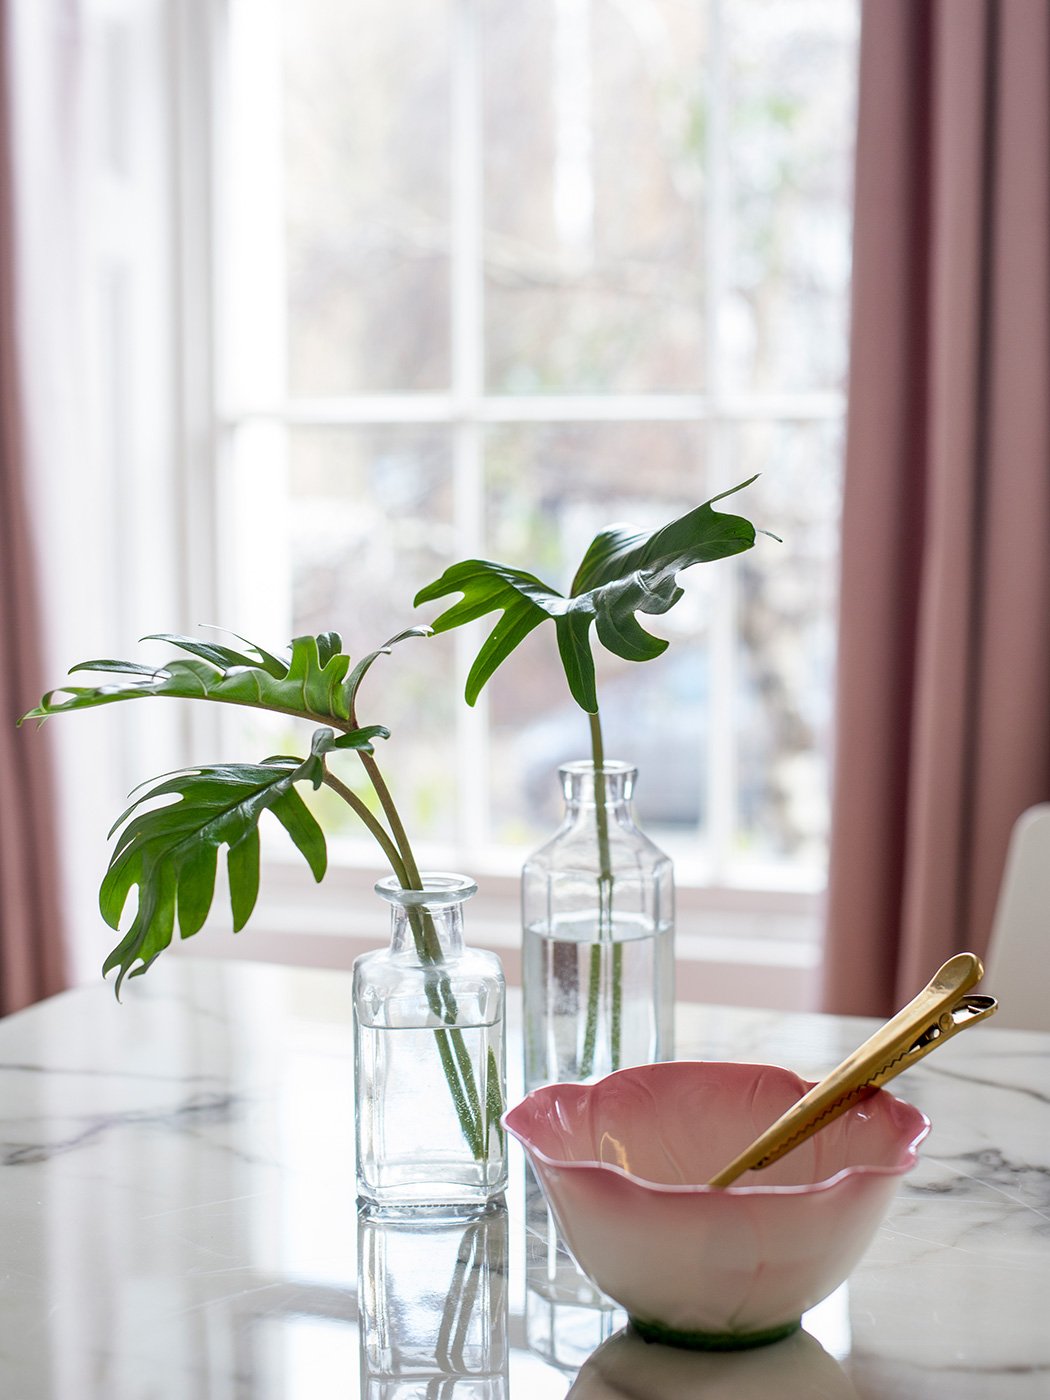 Pink bowl and vase with plant leaves in front of a window